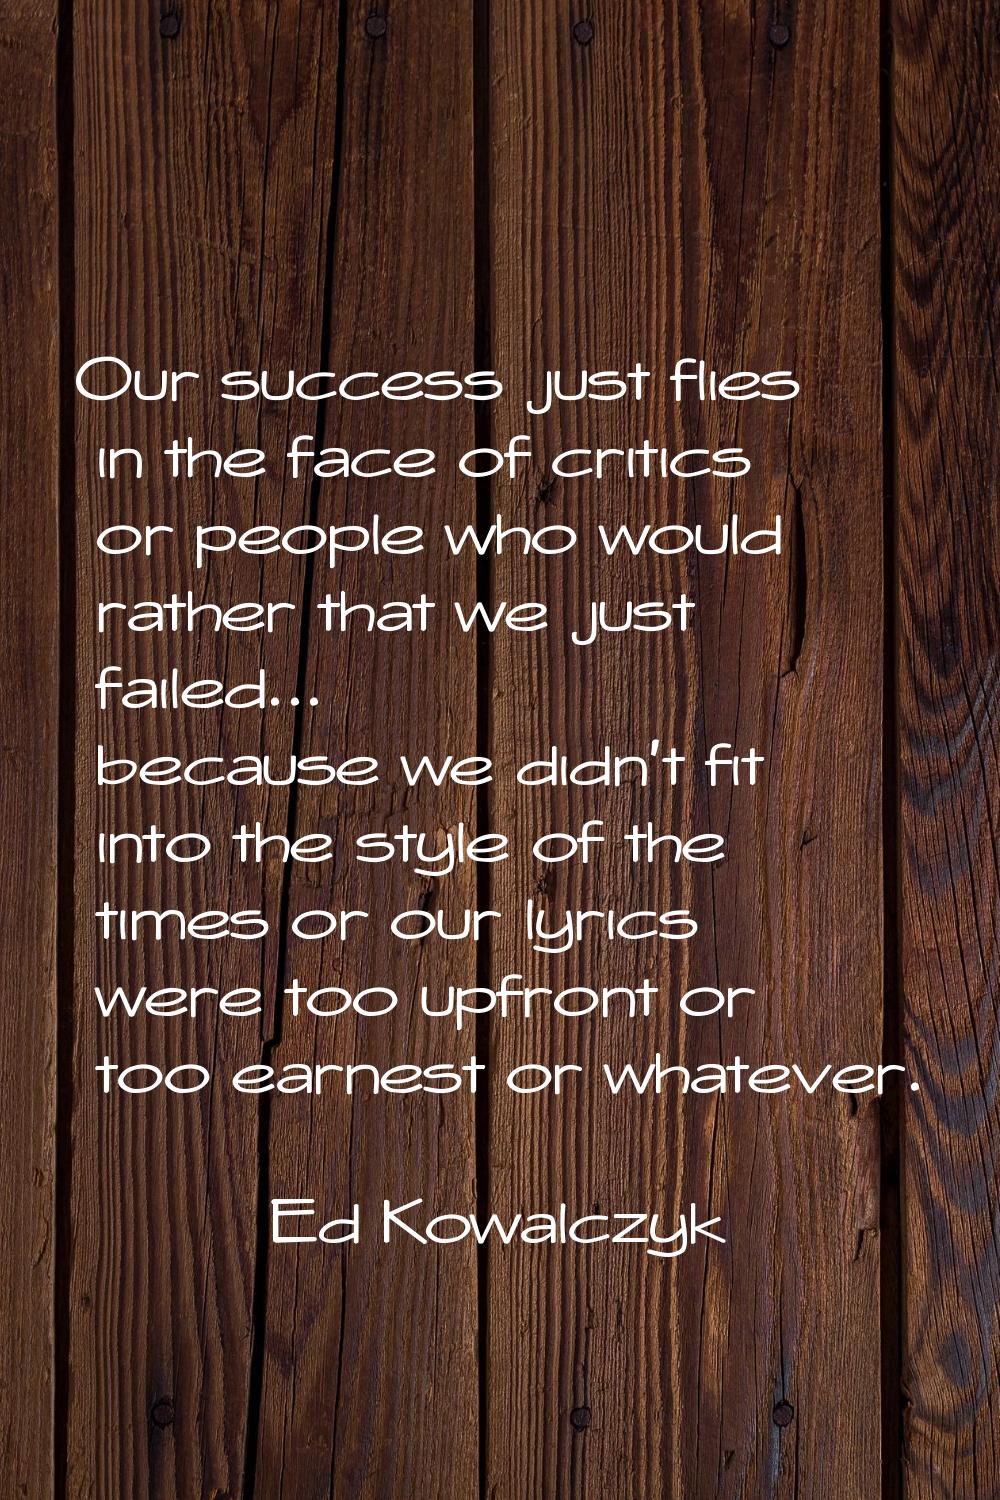 Our success just flies in the face of critics or people who would rather that we just failed... bec